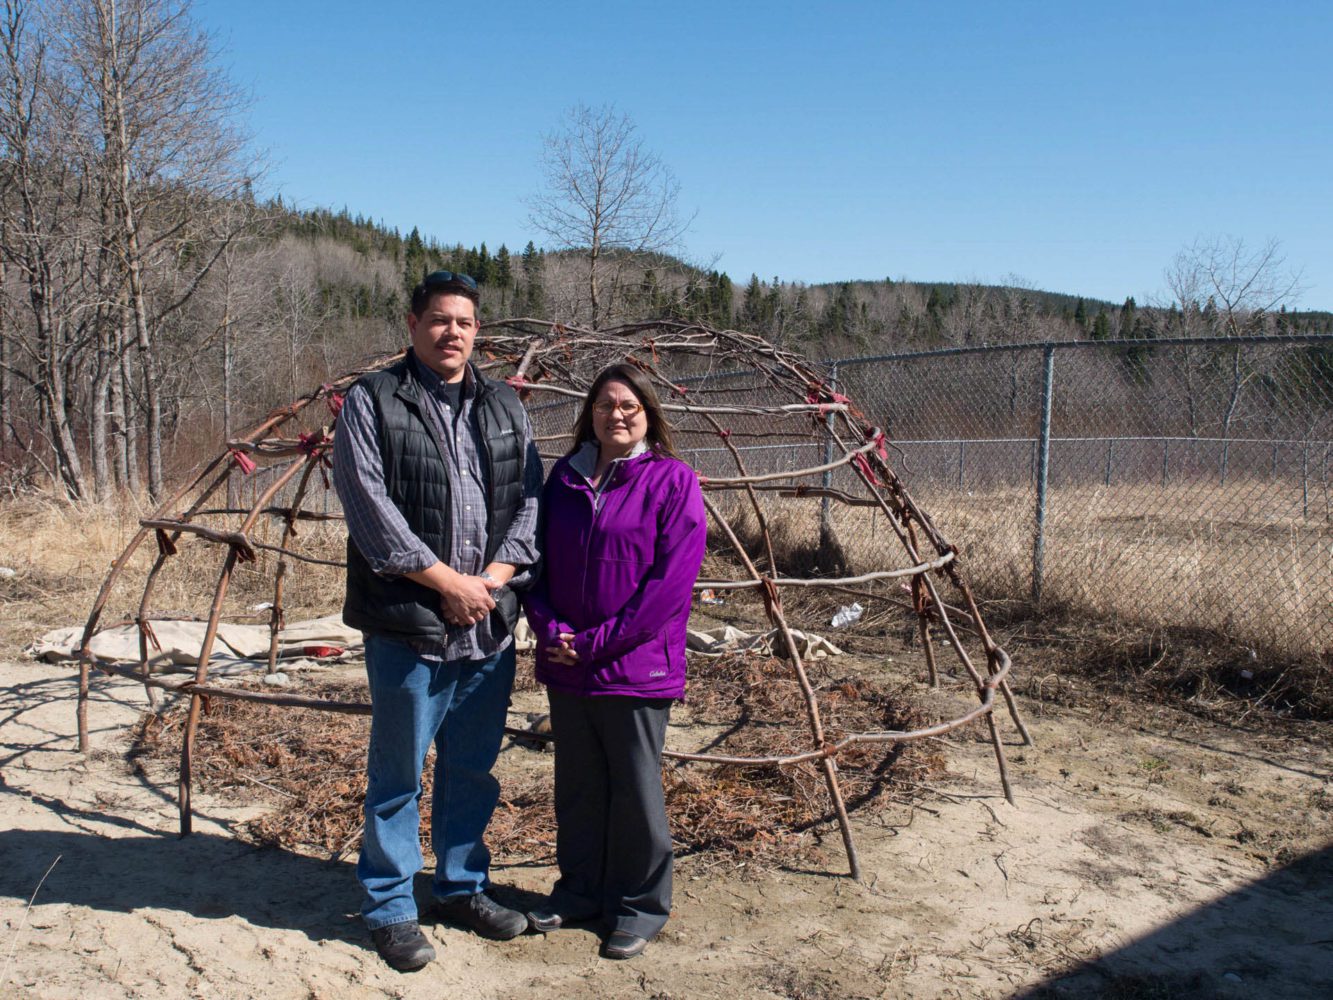 Ojibway health traditions